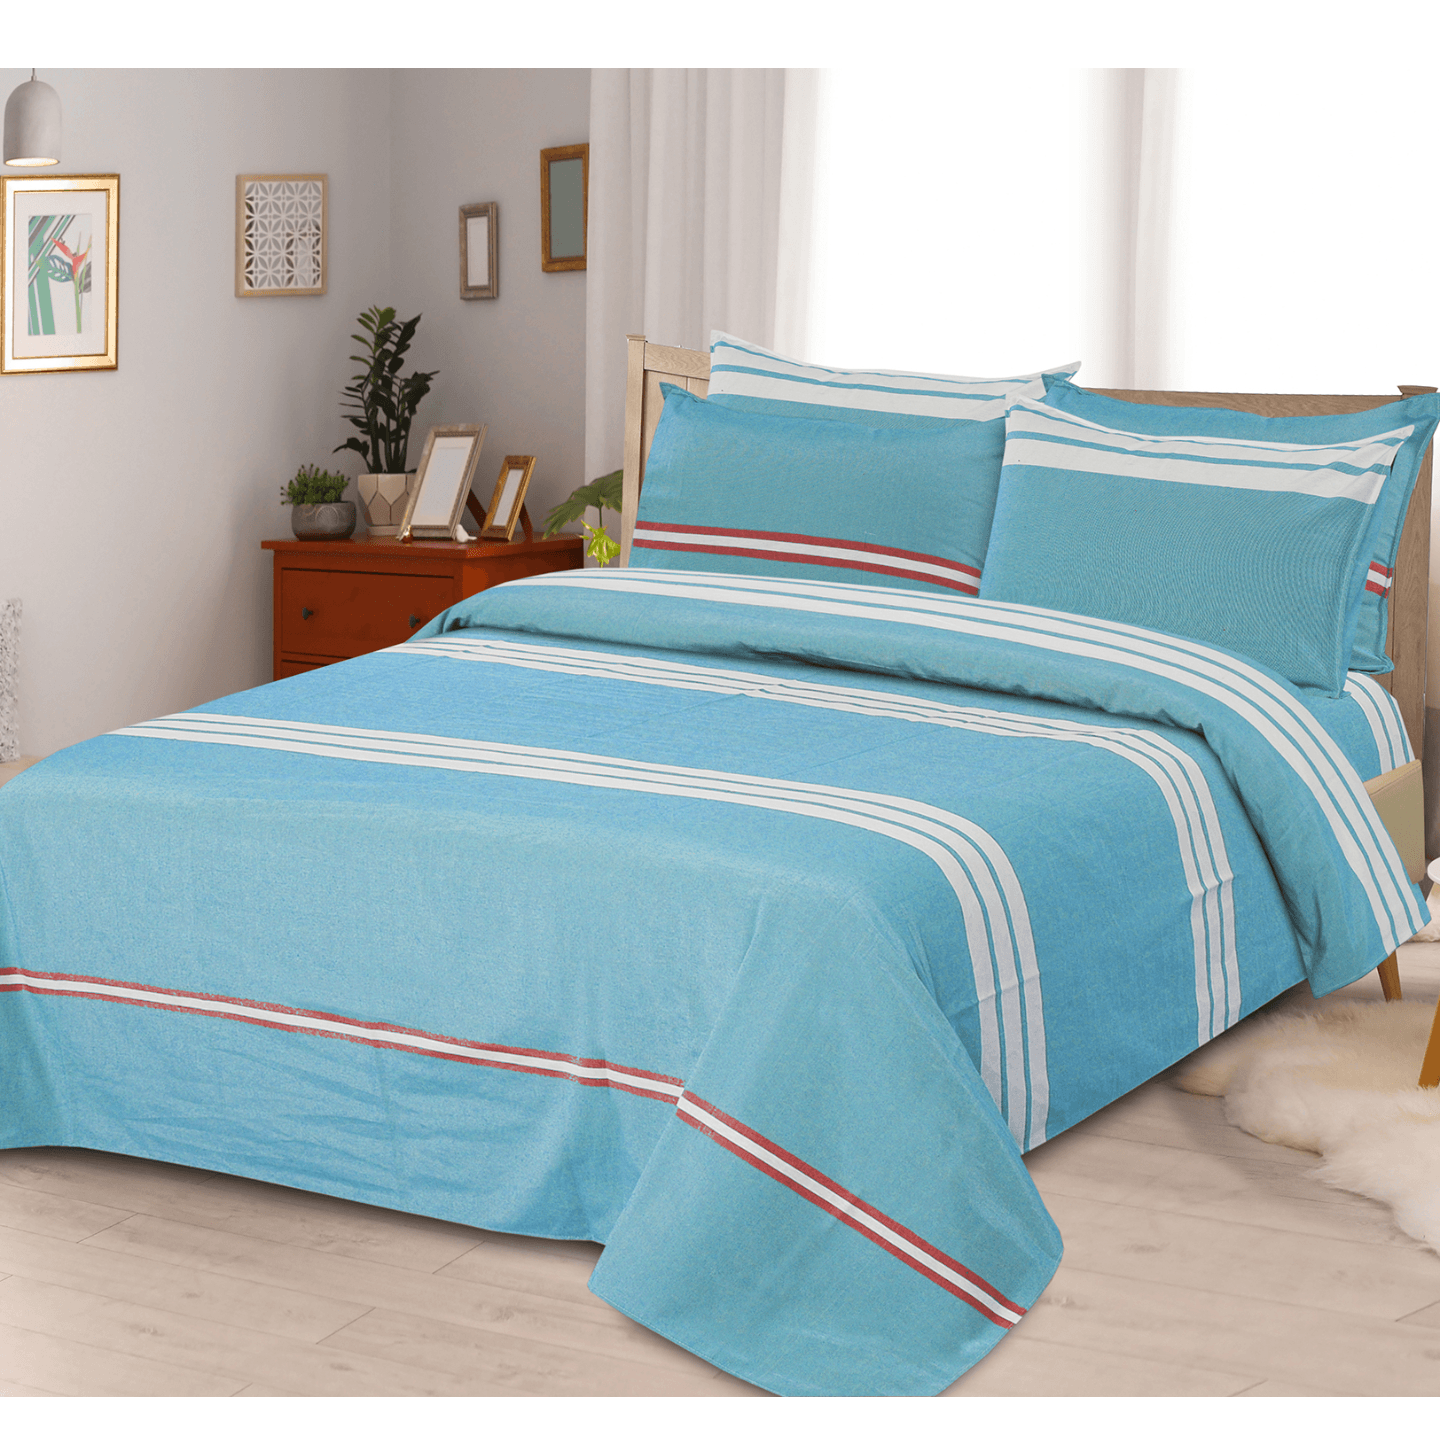 Handtex home cotton double bedsheet 90x100 inch for double bed Firozi colour